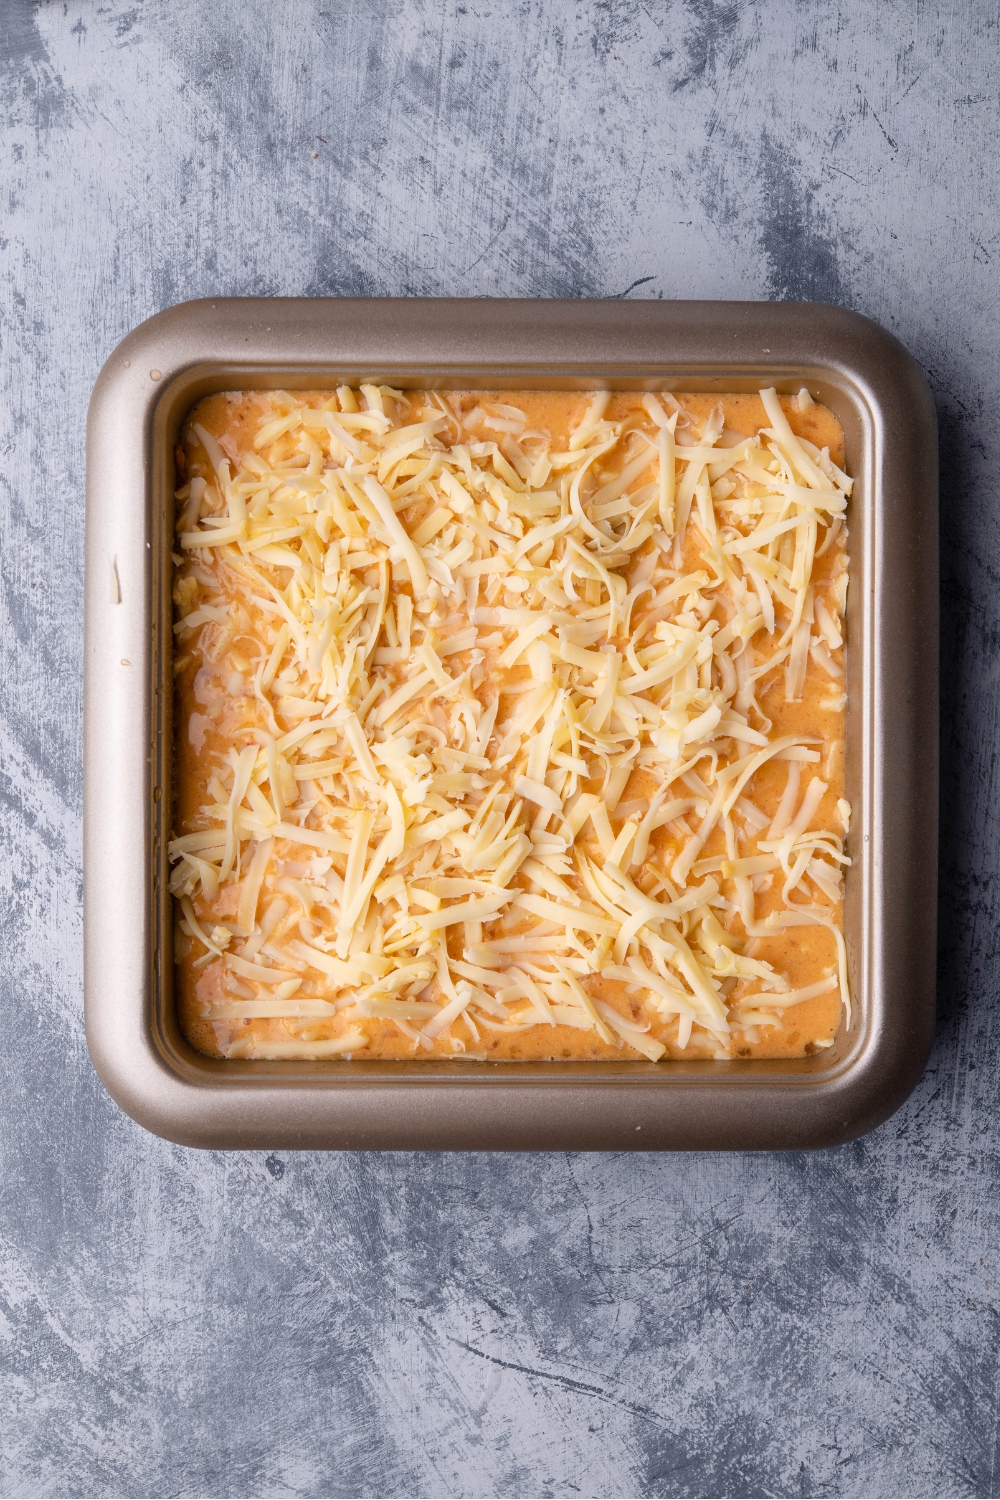 Unbaked chili relleno casserole in a square baking dish covered with shredded cheese.